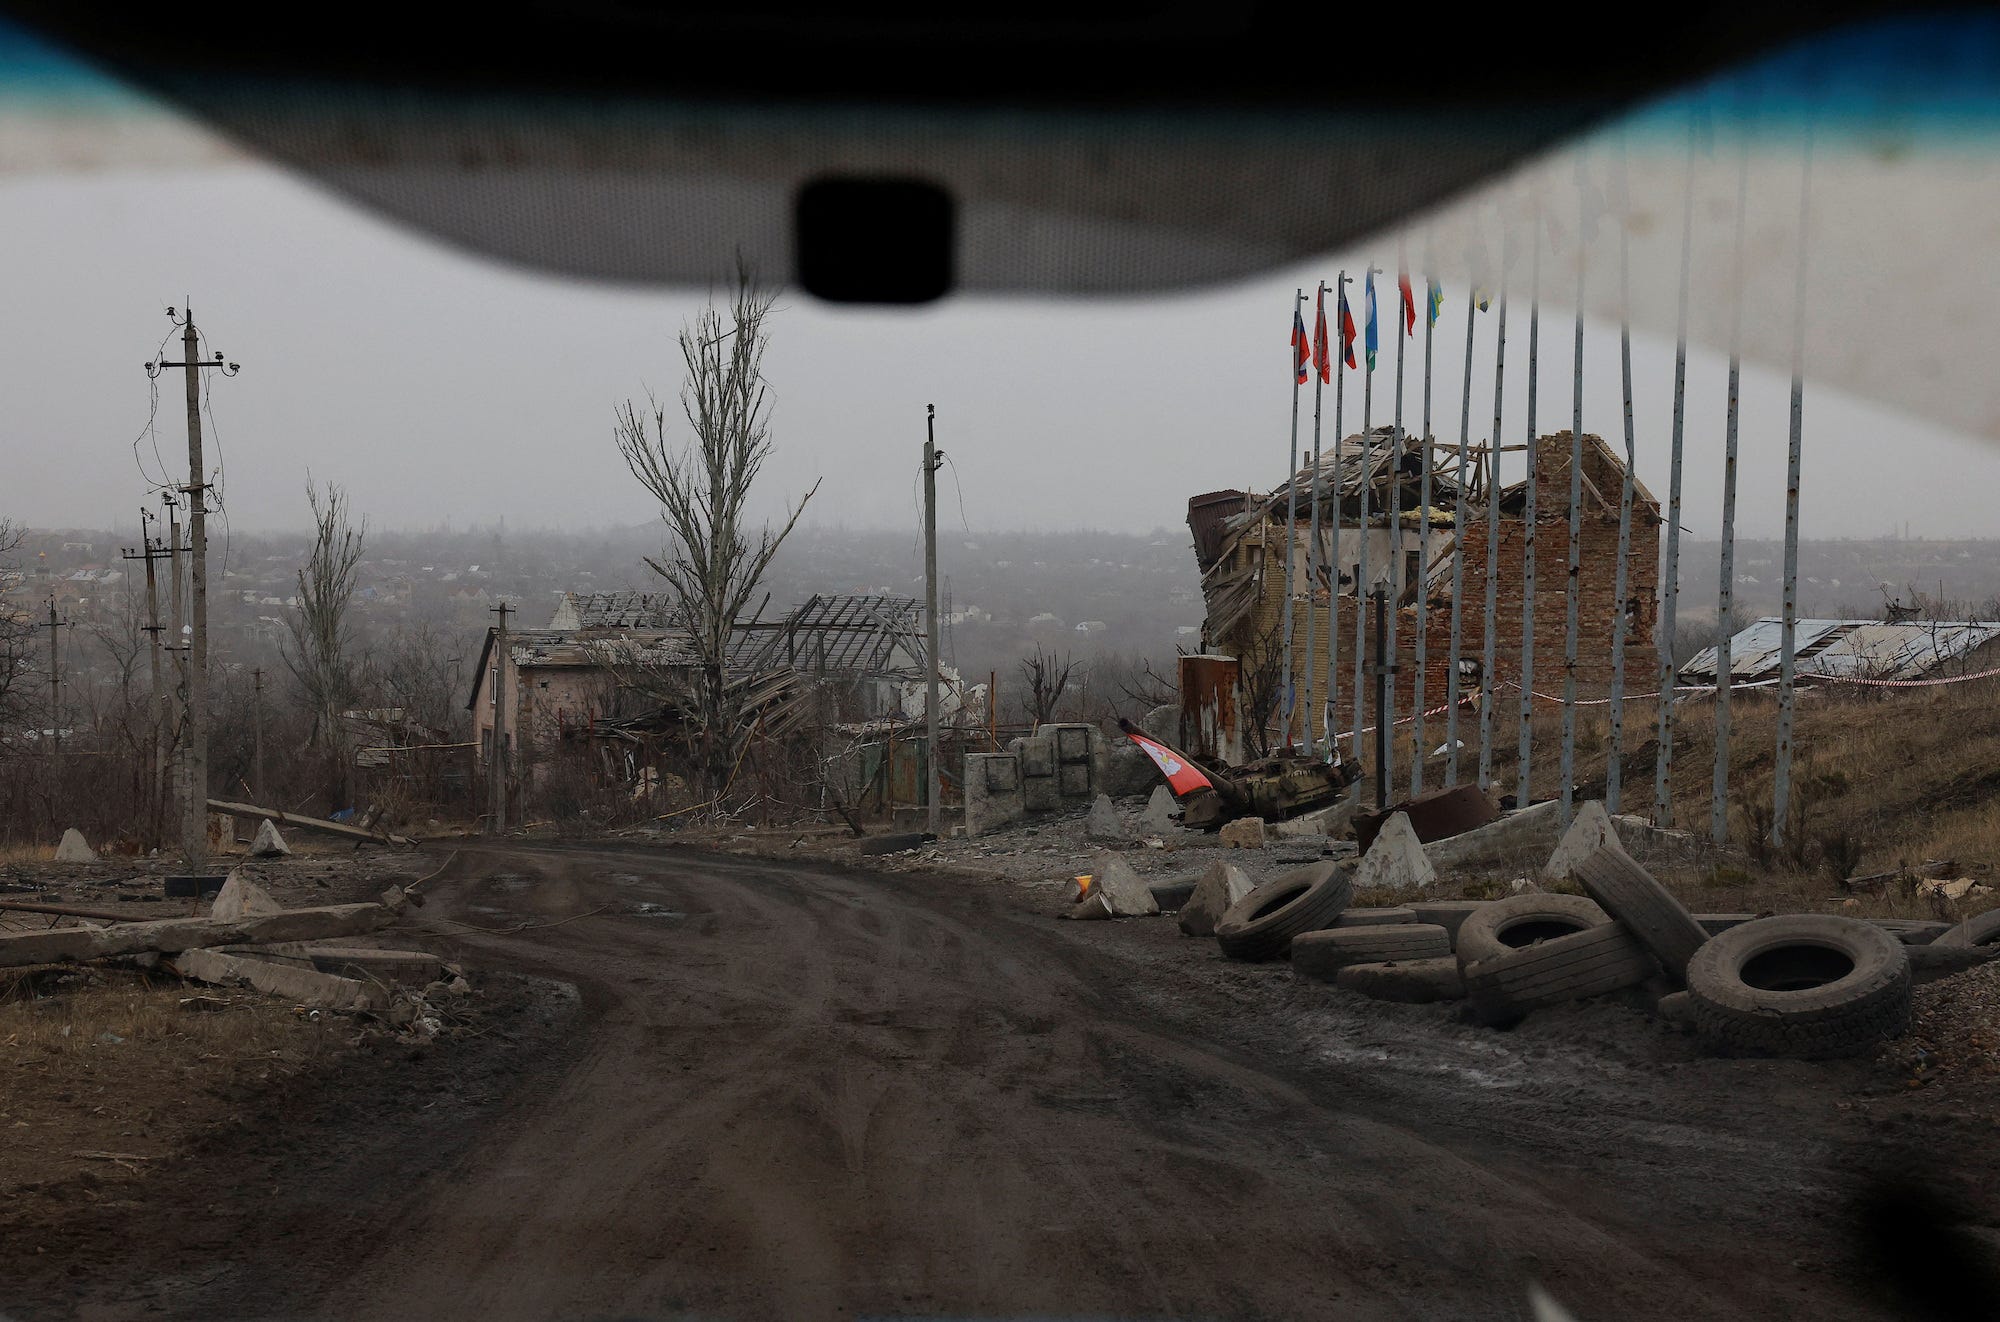 microsoft, ukrainian forces were 'crushing' in avdiivka until russian artillery started outfiring them roughly 20 times over, american volunteer says